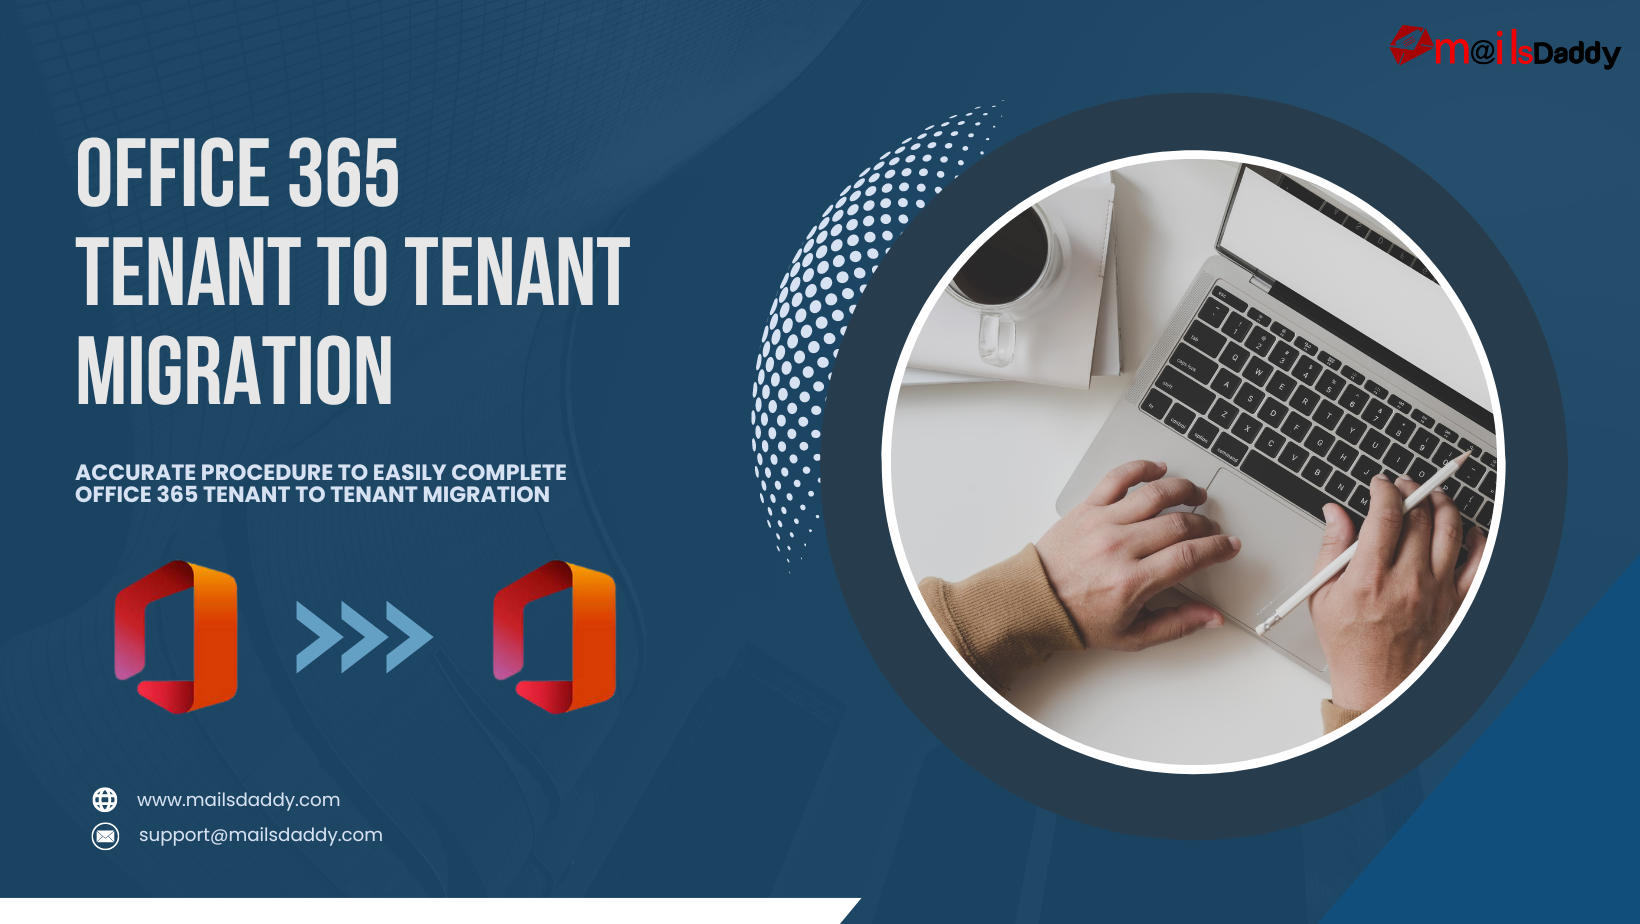 How Users can Process Office 365 Tenant to Tenant Migration?